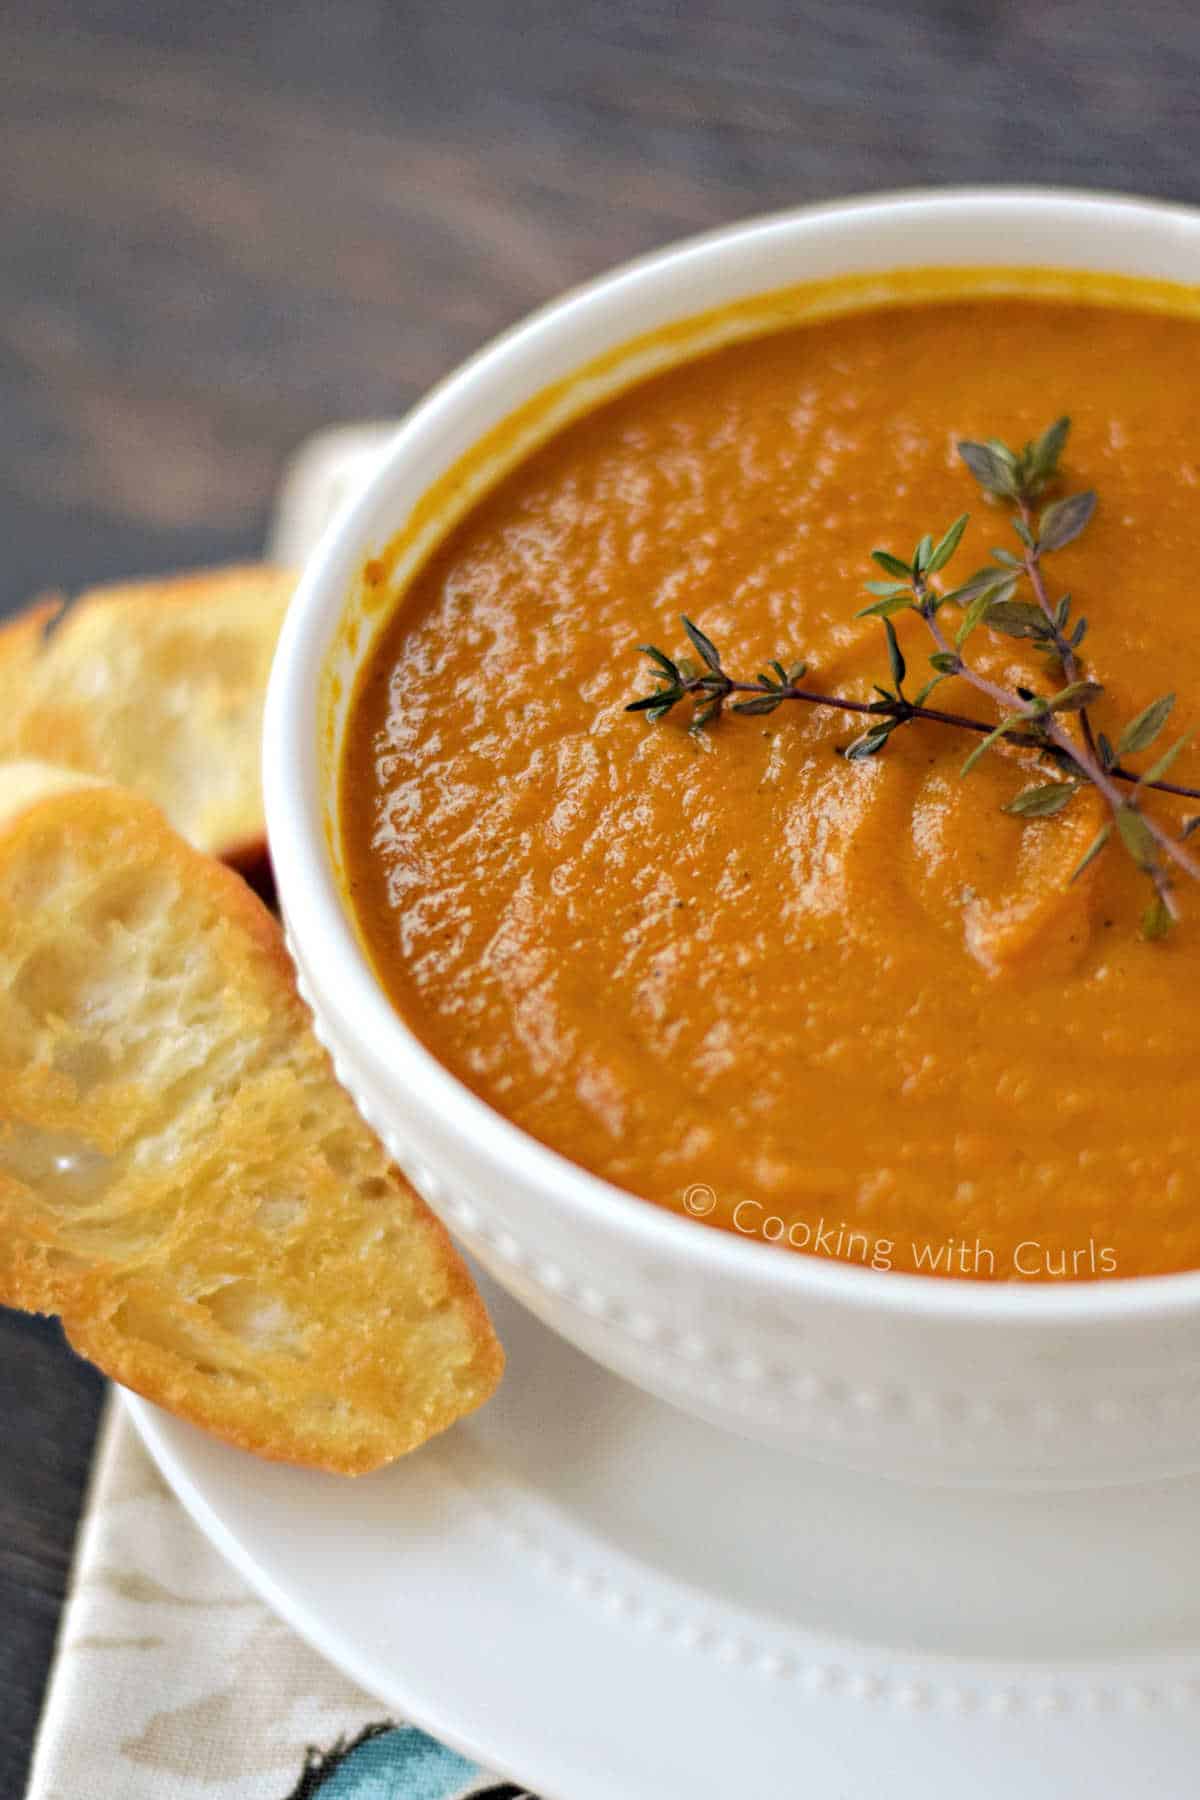 A bowl of carrot ginger soup topped with fresh thyme sprigs, with crostini on the side.